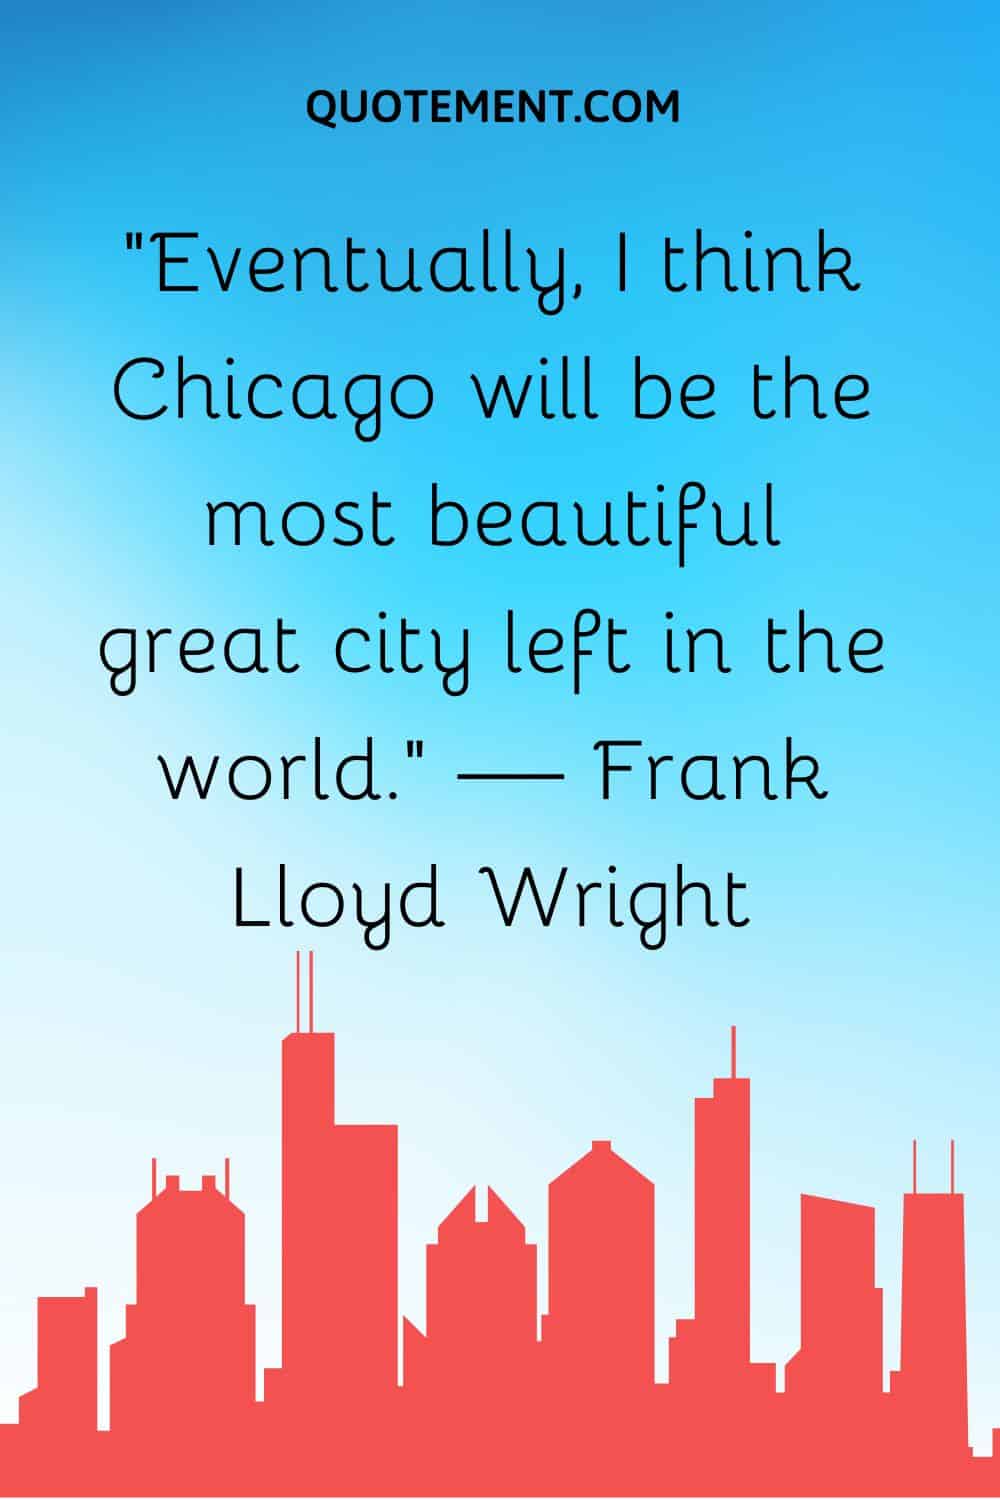 “Eventually, I think Chicago will be the most beautiful great city left in the world.” — Frank Lloyd Wright